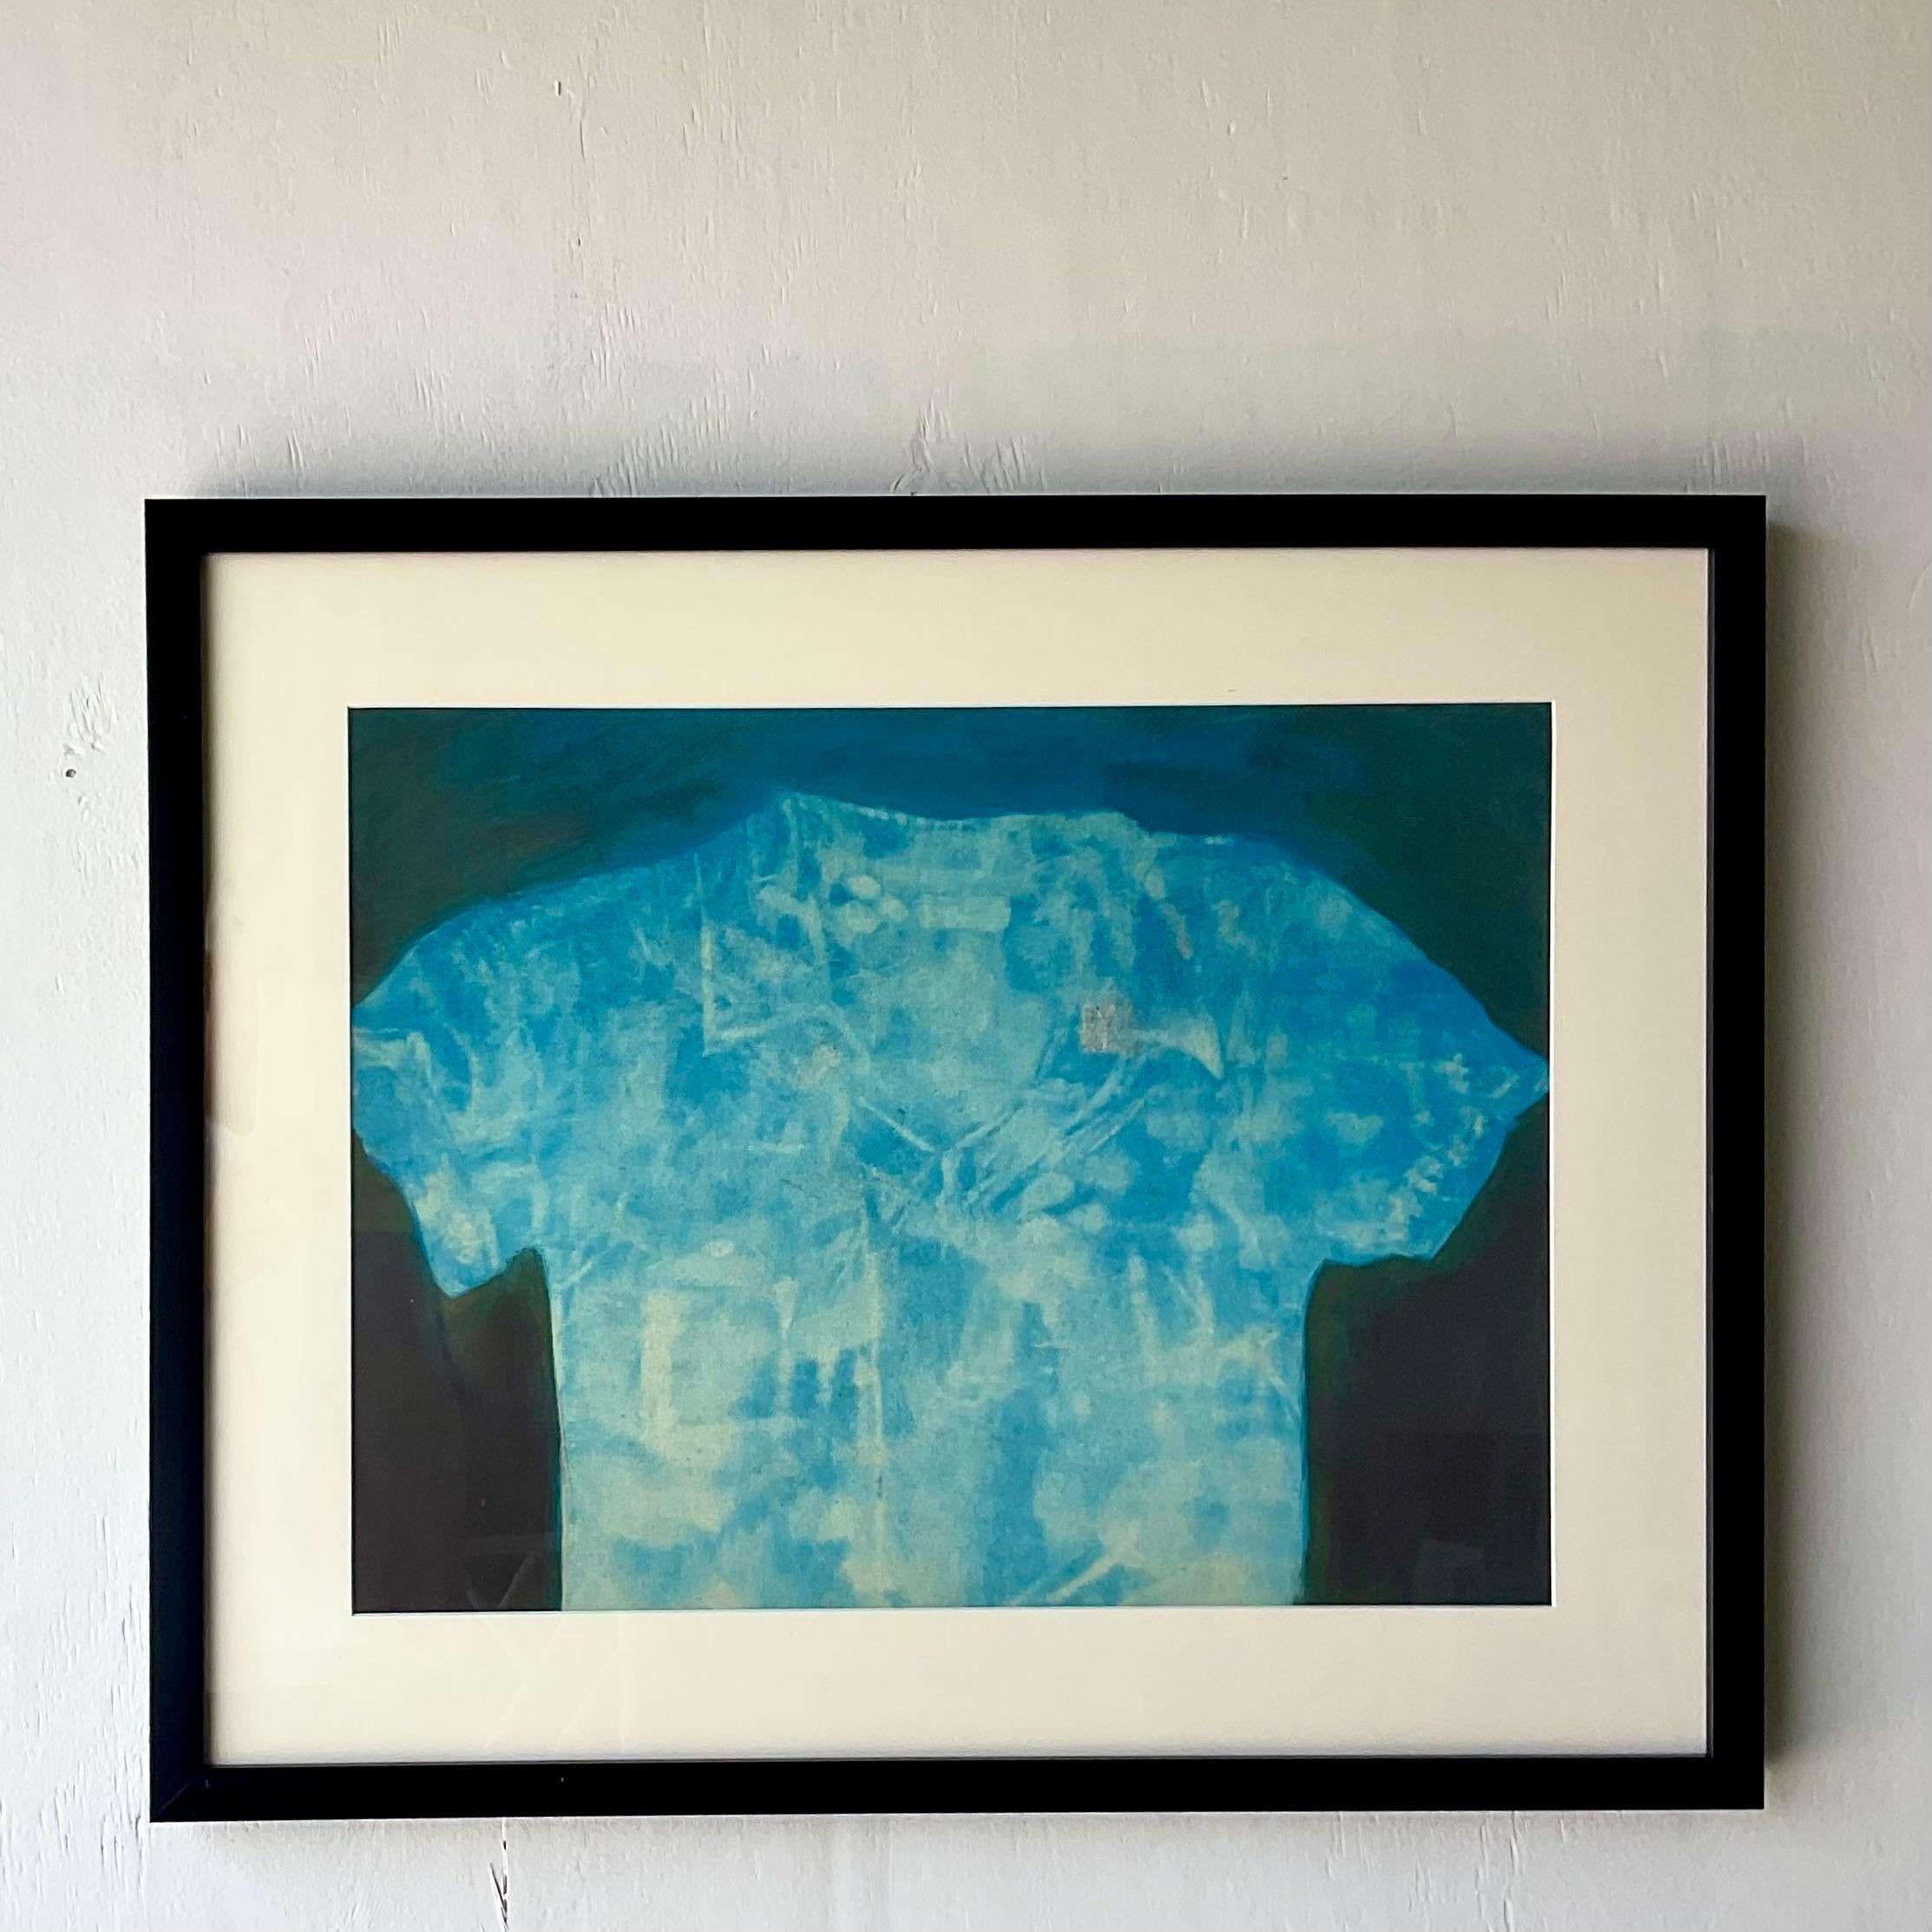 A fabulous vintage Boho original oil painting on paper. A beautiful composition of a shirt in brilliant shade of blue. Done by the artist Joe Davoli. Acquired from a Ft Lauderdale estate.